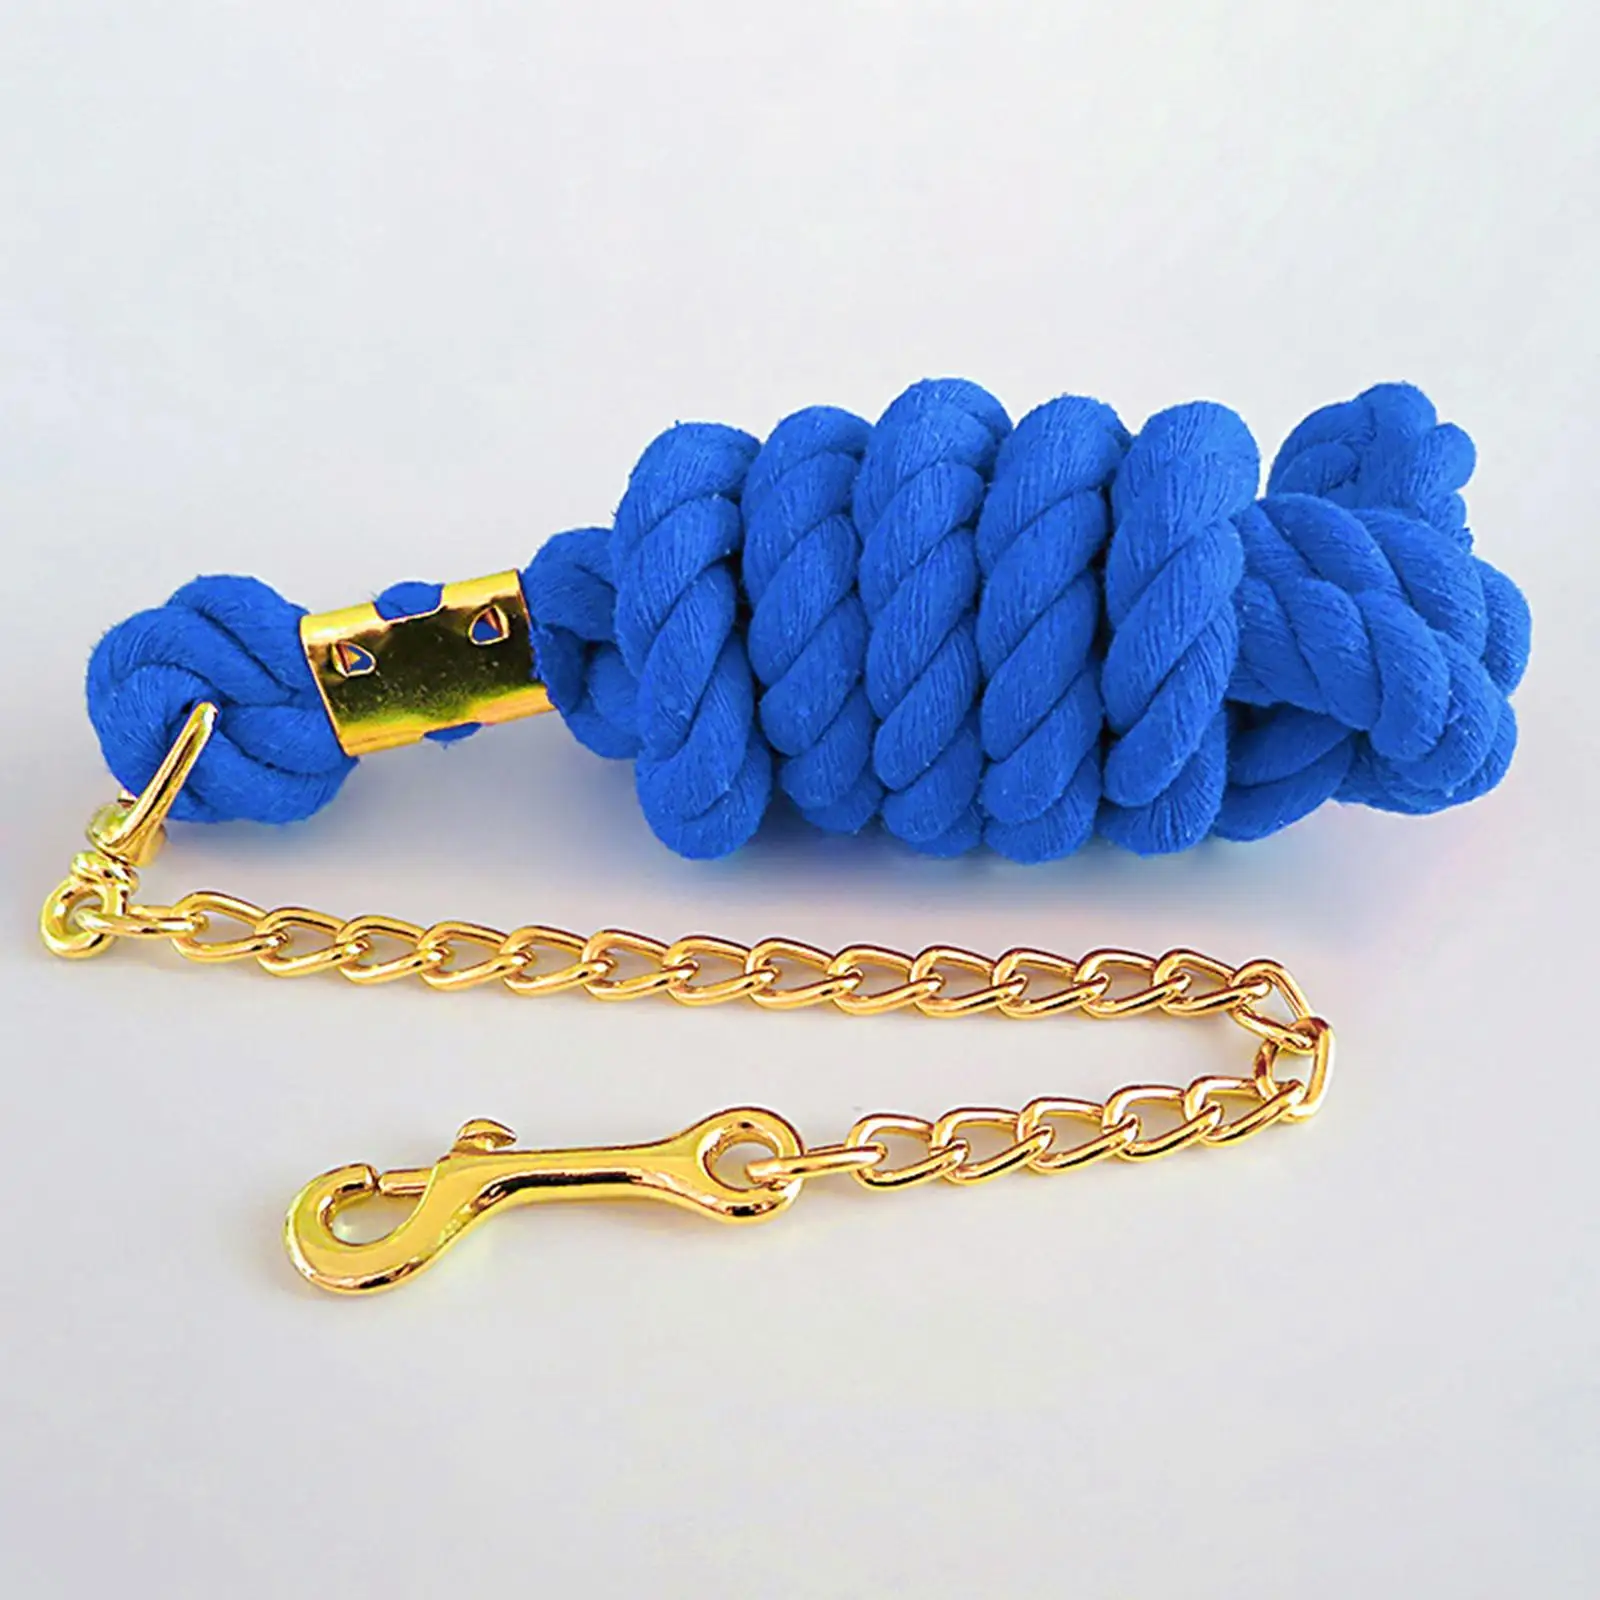 Braided   Leading Rope with Chain Accessories Easy Use Practical